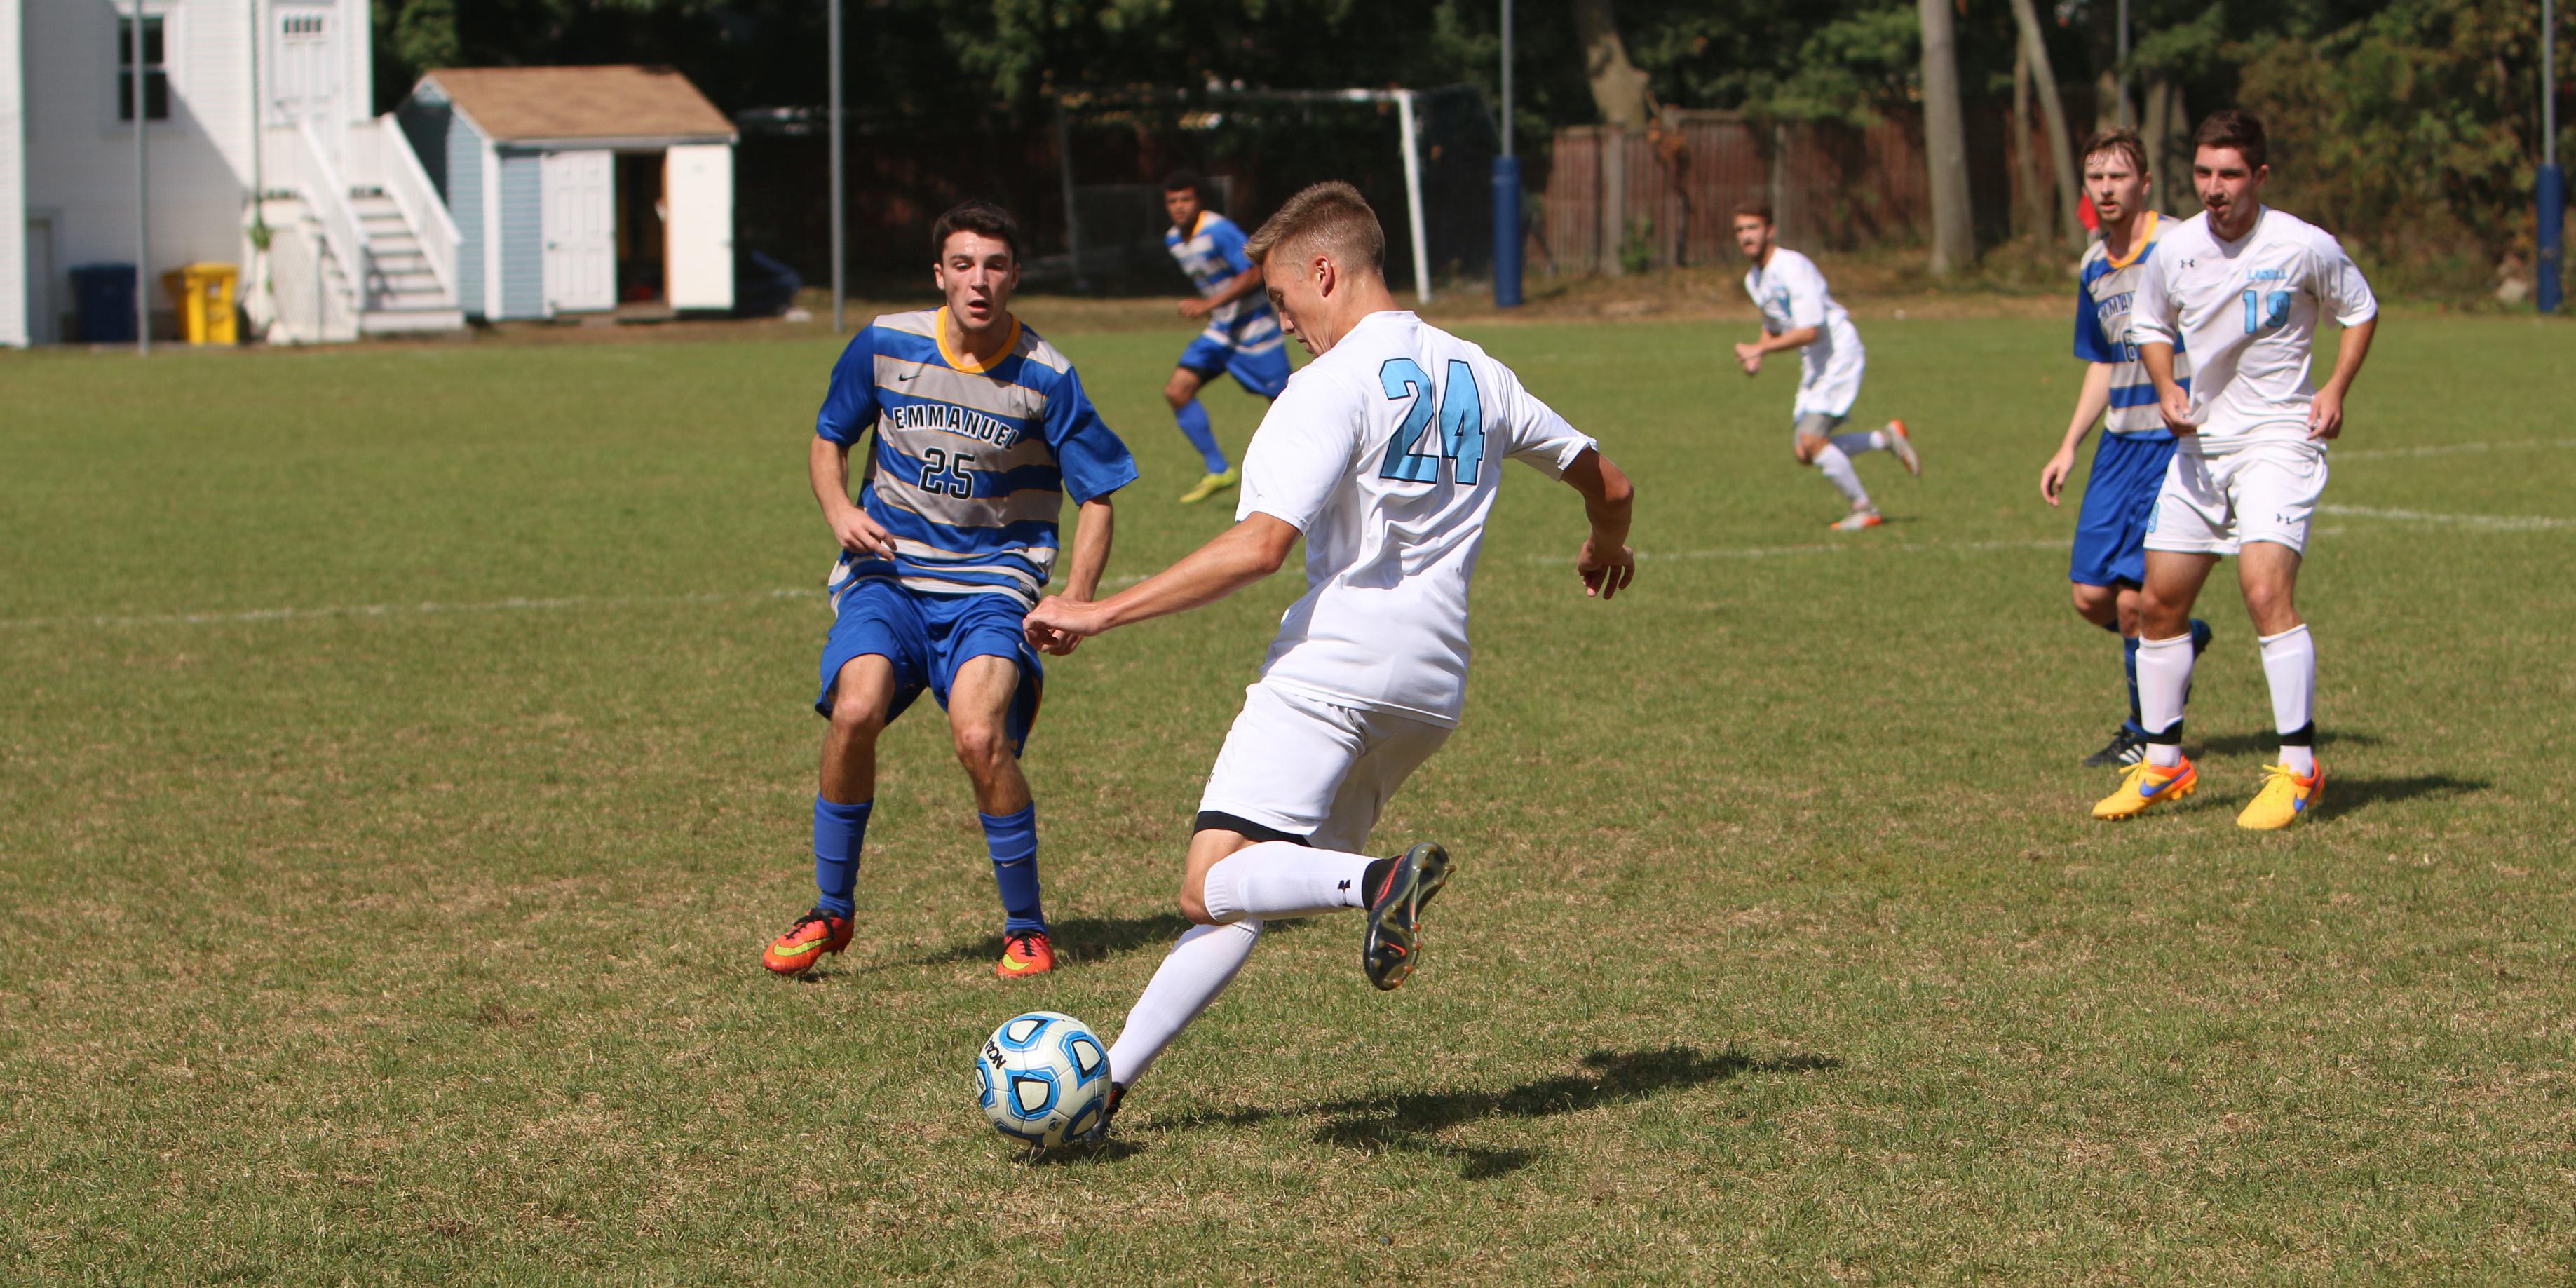 Mustangs Come Back to Defeat Men's Soccer 2-1